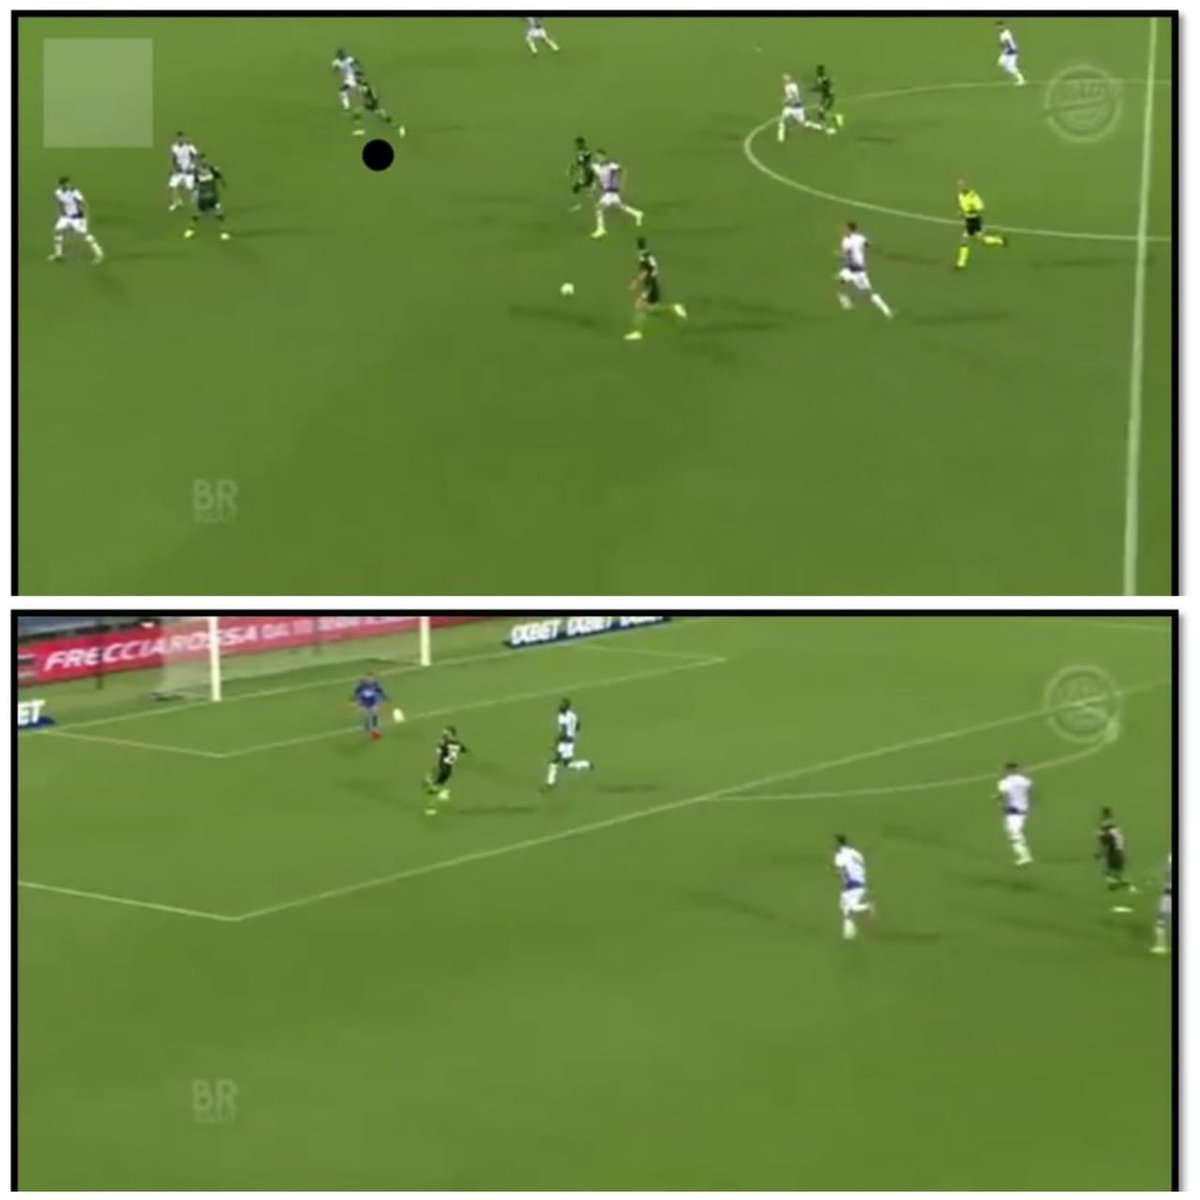 Here we can see Locatelli making a dash forward and had two options upfront. He could pass it to the player in front of him but he was double marked by the opposition players, so he quickly found another option as one of his teammate was making a run into space highlighted (1/2)